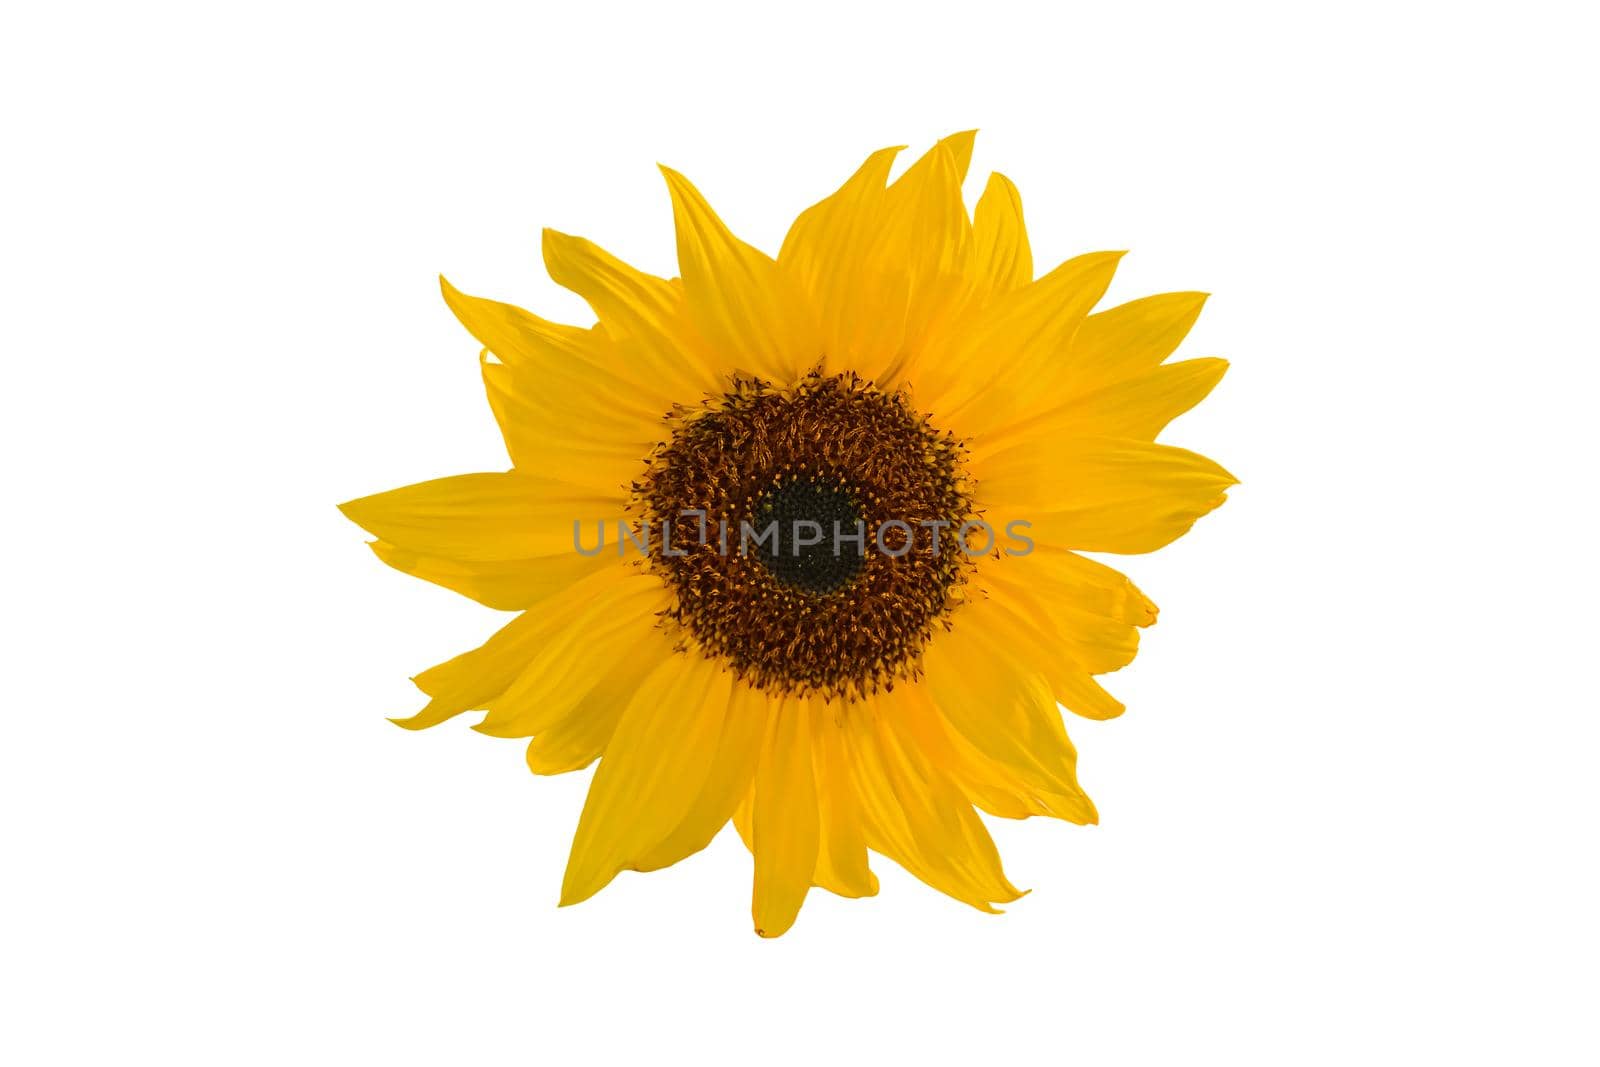 Yellow sunflower over the white background